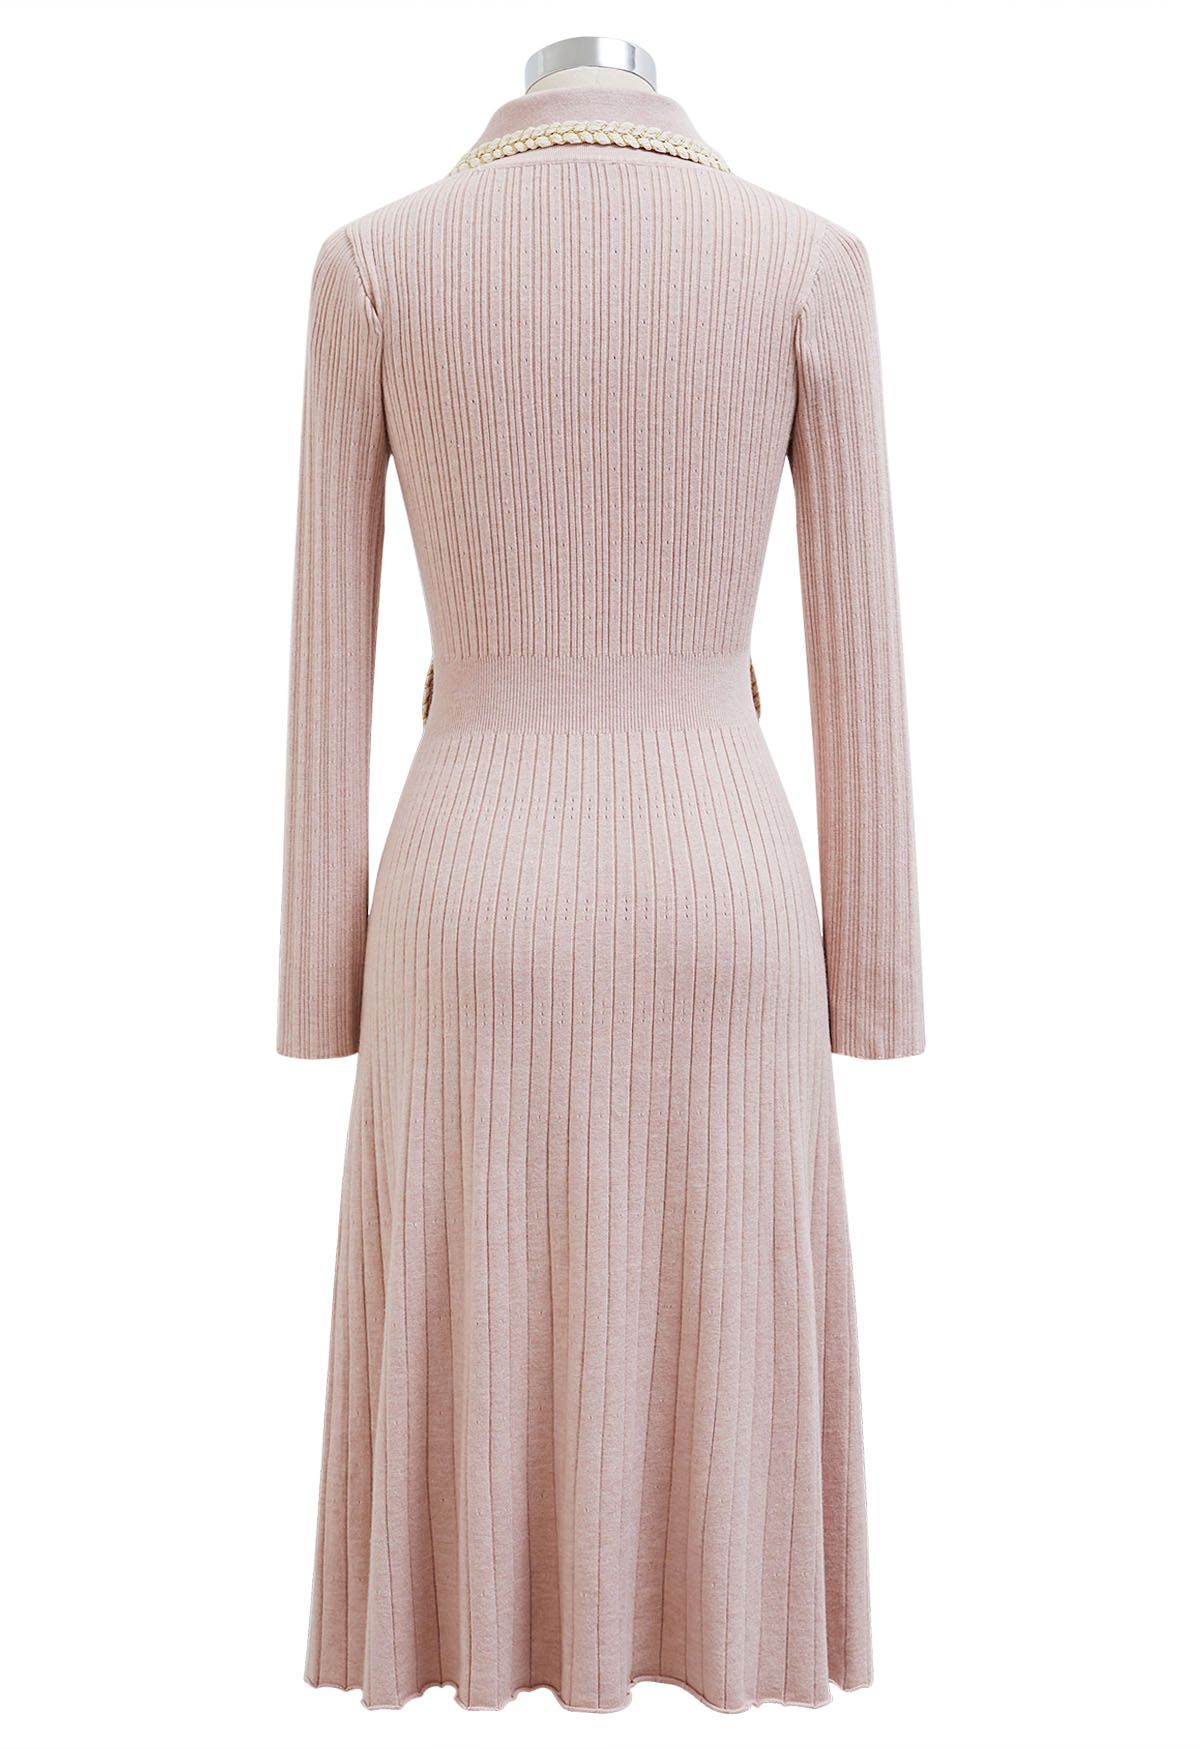 Collared Braided Edge Knit Midi Dress in Pink